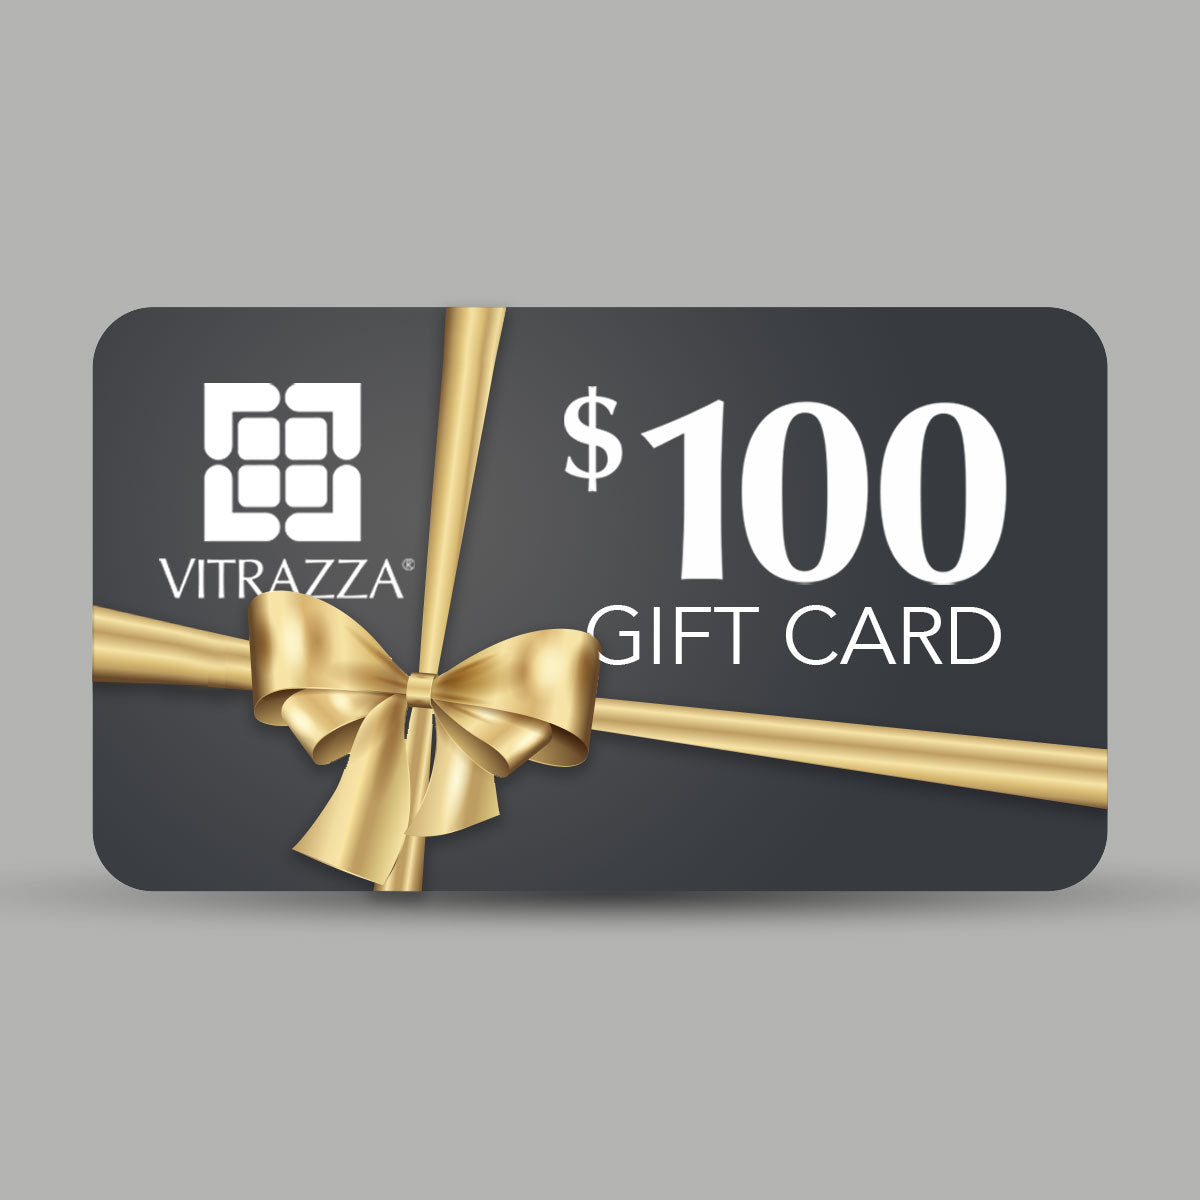 variant_title: Gift Card | Size: $100.00 USD :: alt_text: